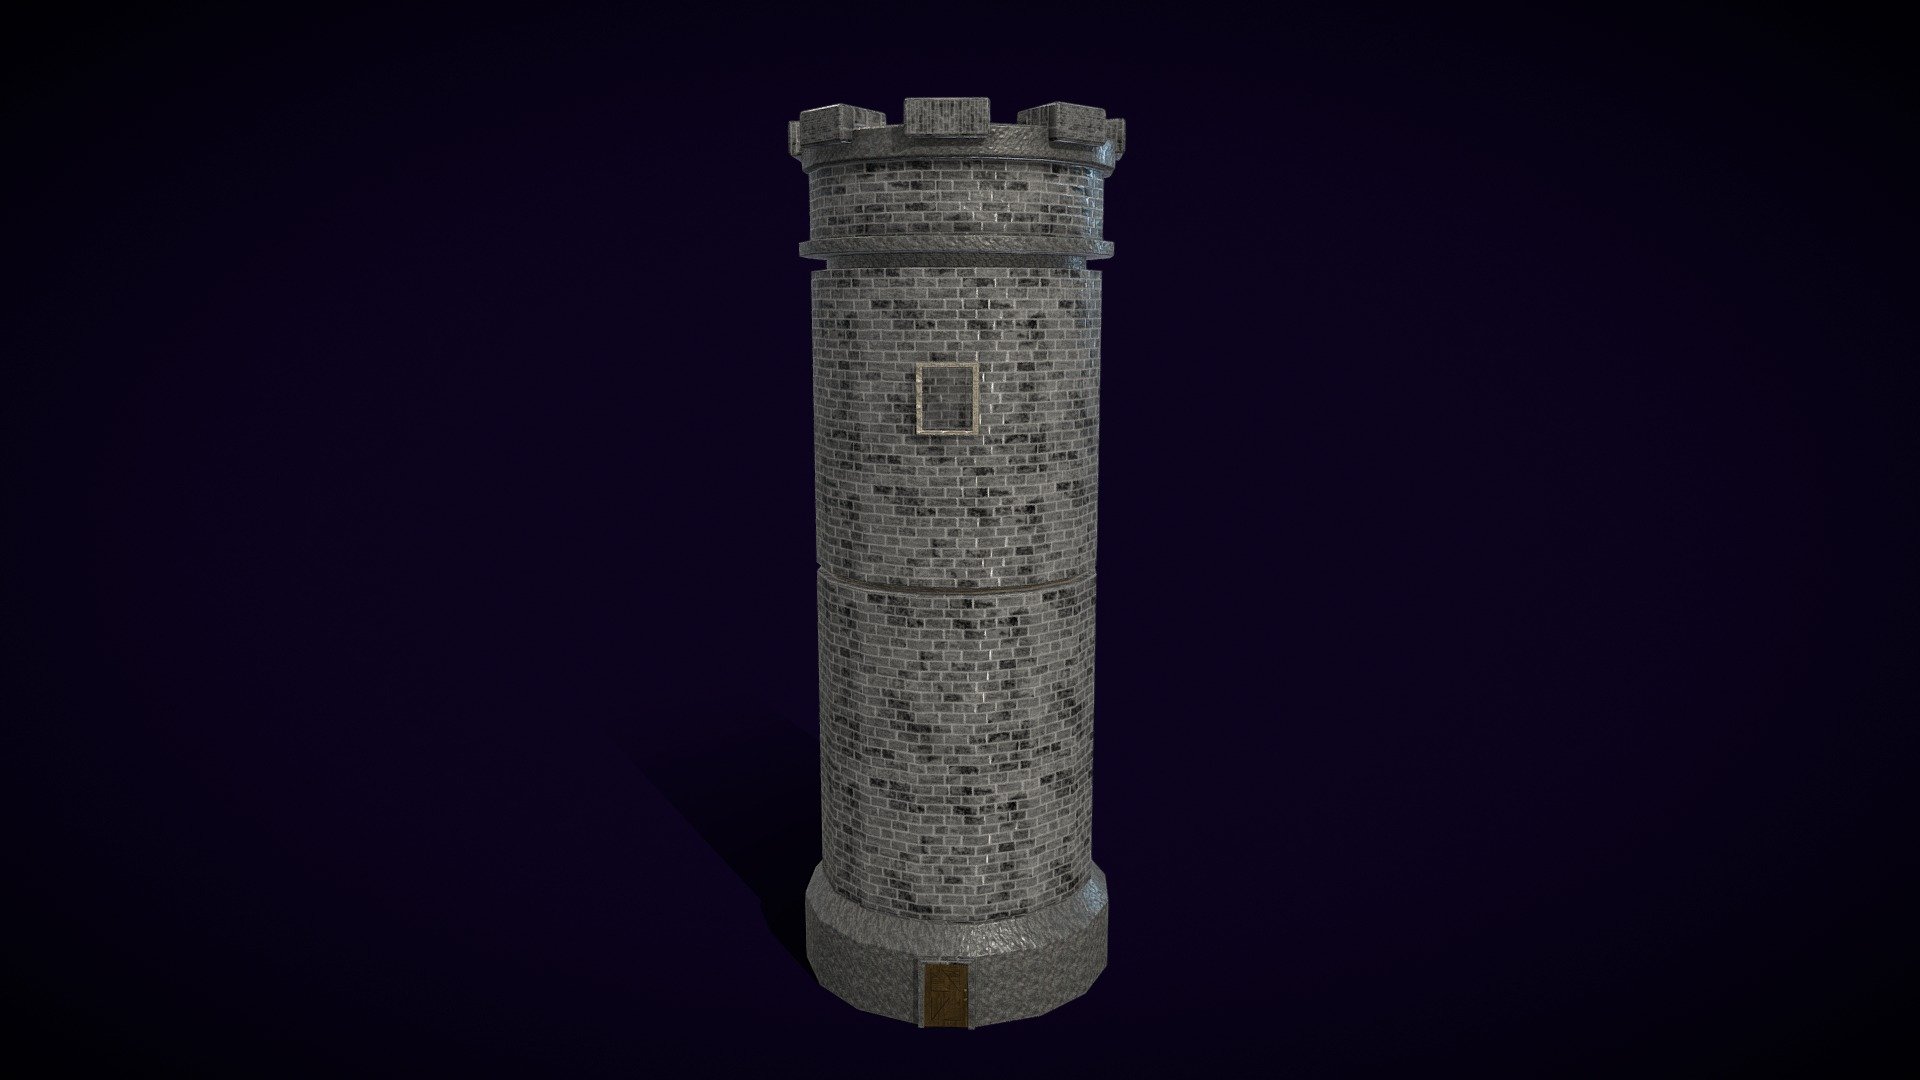 A 2nd Castle Tower 3D Model from the game Duellum Medieval Wars - Castle Tower 2nd - 3D Model - 3D model by dgonlinebr 3d model